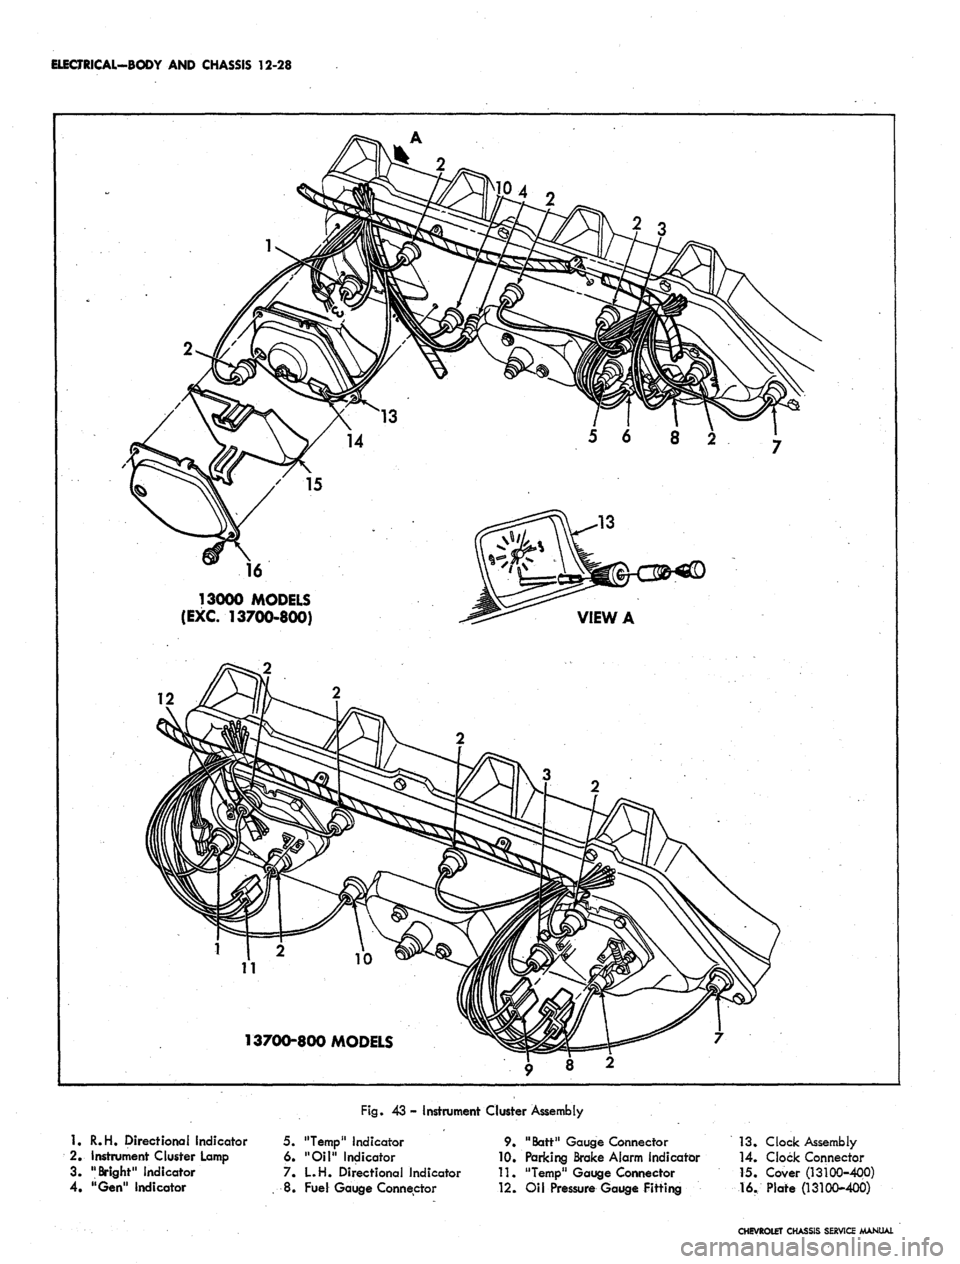 CHEVROLET CAMARO 1967 1.G Chassis Workshop Manual 
ELECTRICAL-BODY
 AND
 CHASSIS
 12-28

13000 MODELS

(EXC.
 13700-800)

VIEW
 A

12

11

13700-800 MODELS

Fig.
 43 -
 Instrumeni- Cluster Assembly

1.
 R.H.
 Directional Indicator

2.
 Instrument Clu